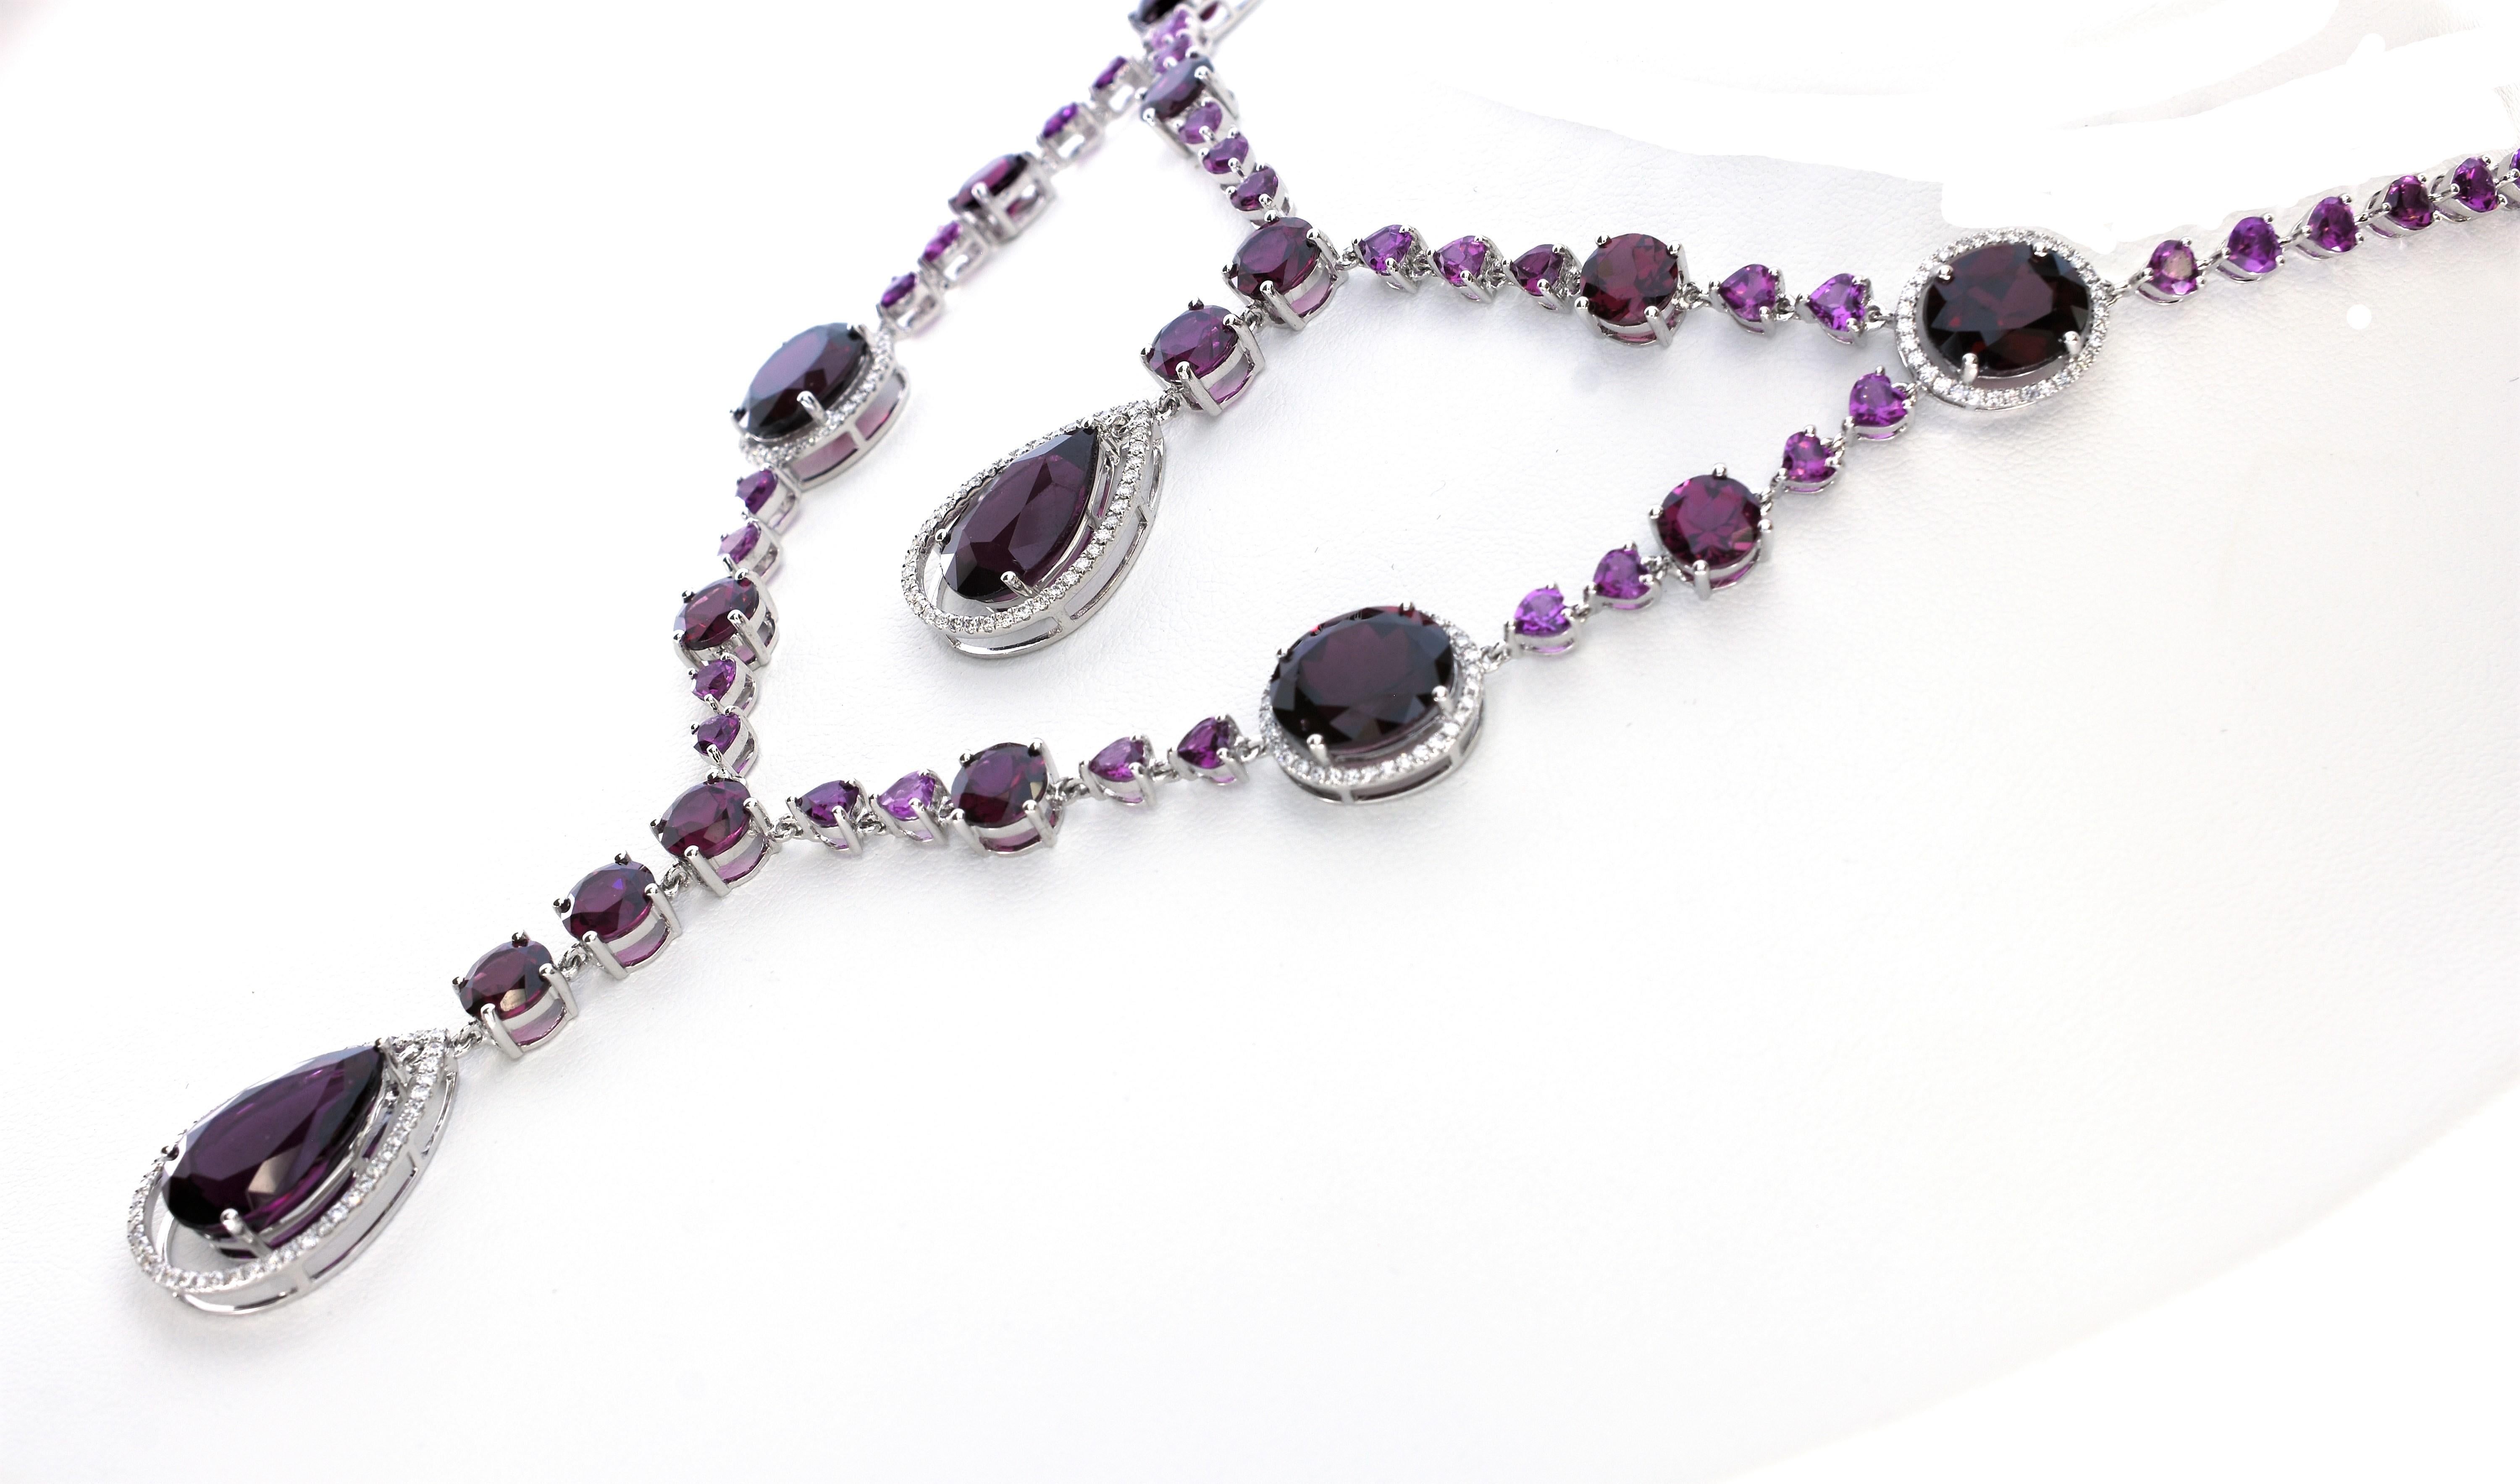 A dazzling array and shades of purple appear from the richness of this beautiful 87.53 Carat purple Rhodolite Garnet And Diamond Necklace. 
This beautiful necklace made by Shimon's Creations is set with 86.03 carats of Purple Rhodolite Garnets,